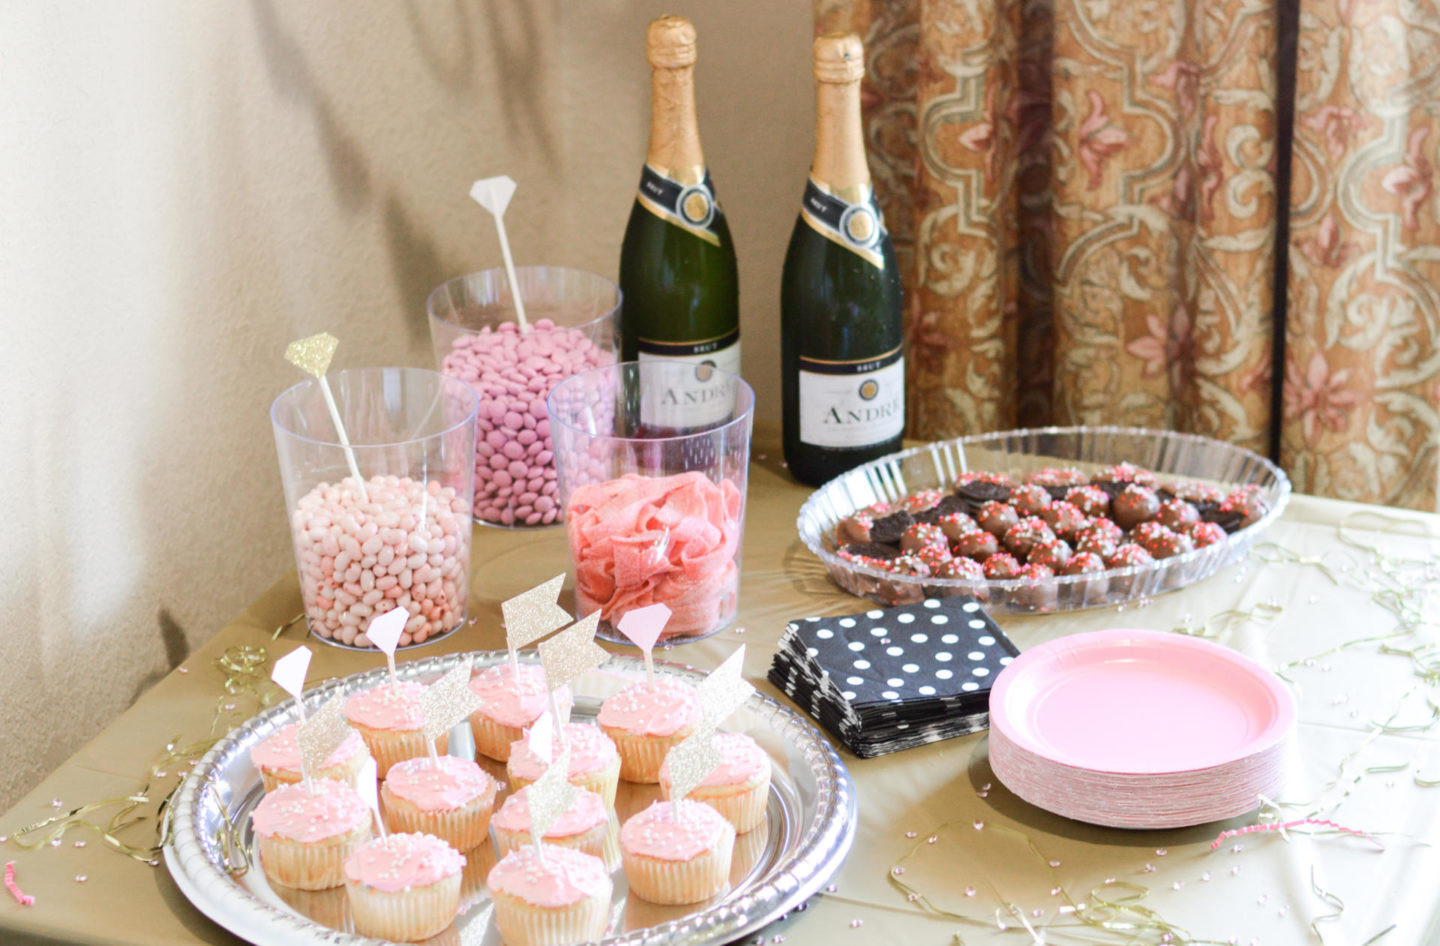 Bachelorette Party Ideas With Minors
 Hotel Bachelorette Party 101